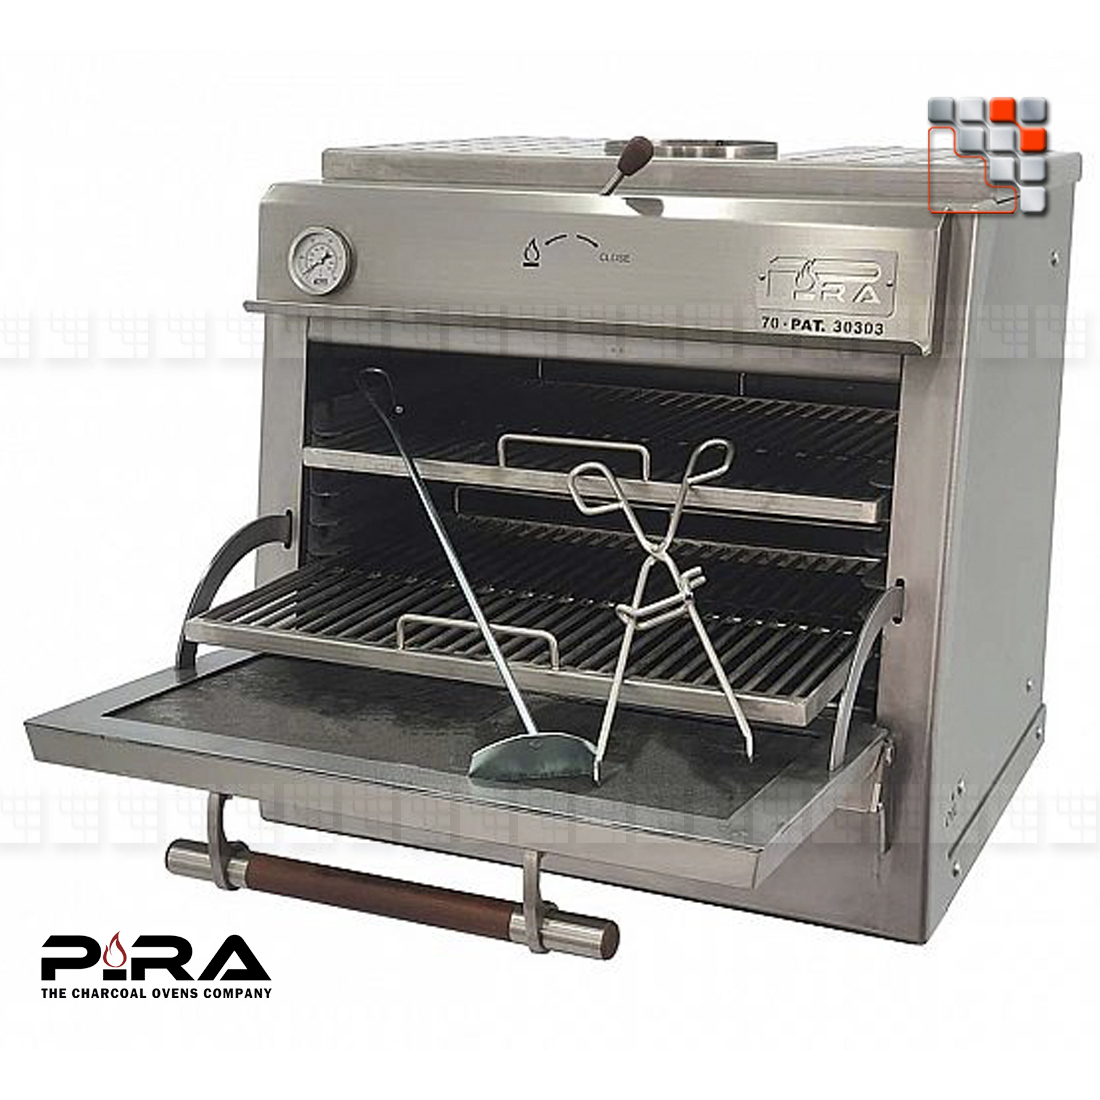 Tisonnier 50 - Pira Charcoal Ovens and Barbecues